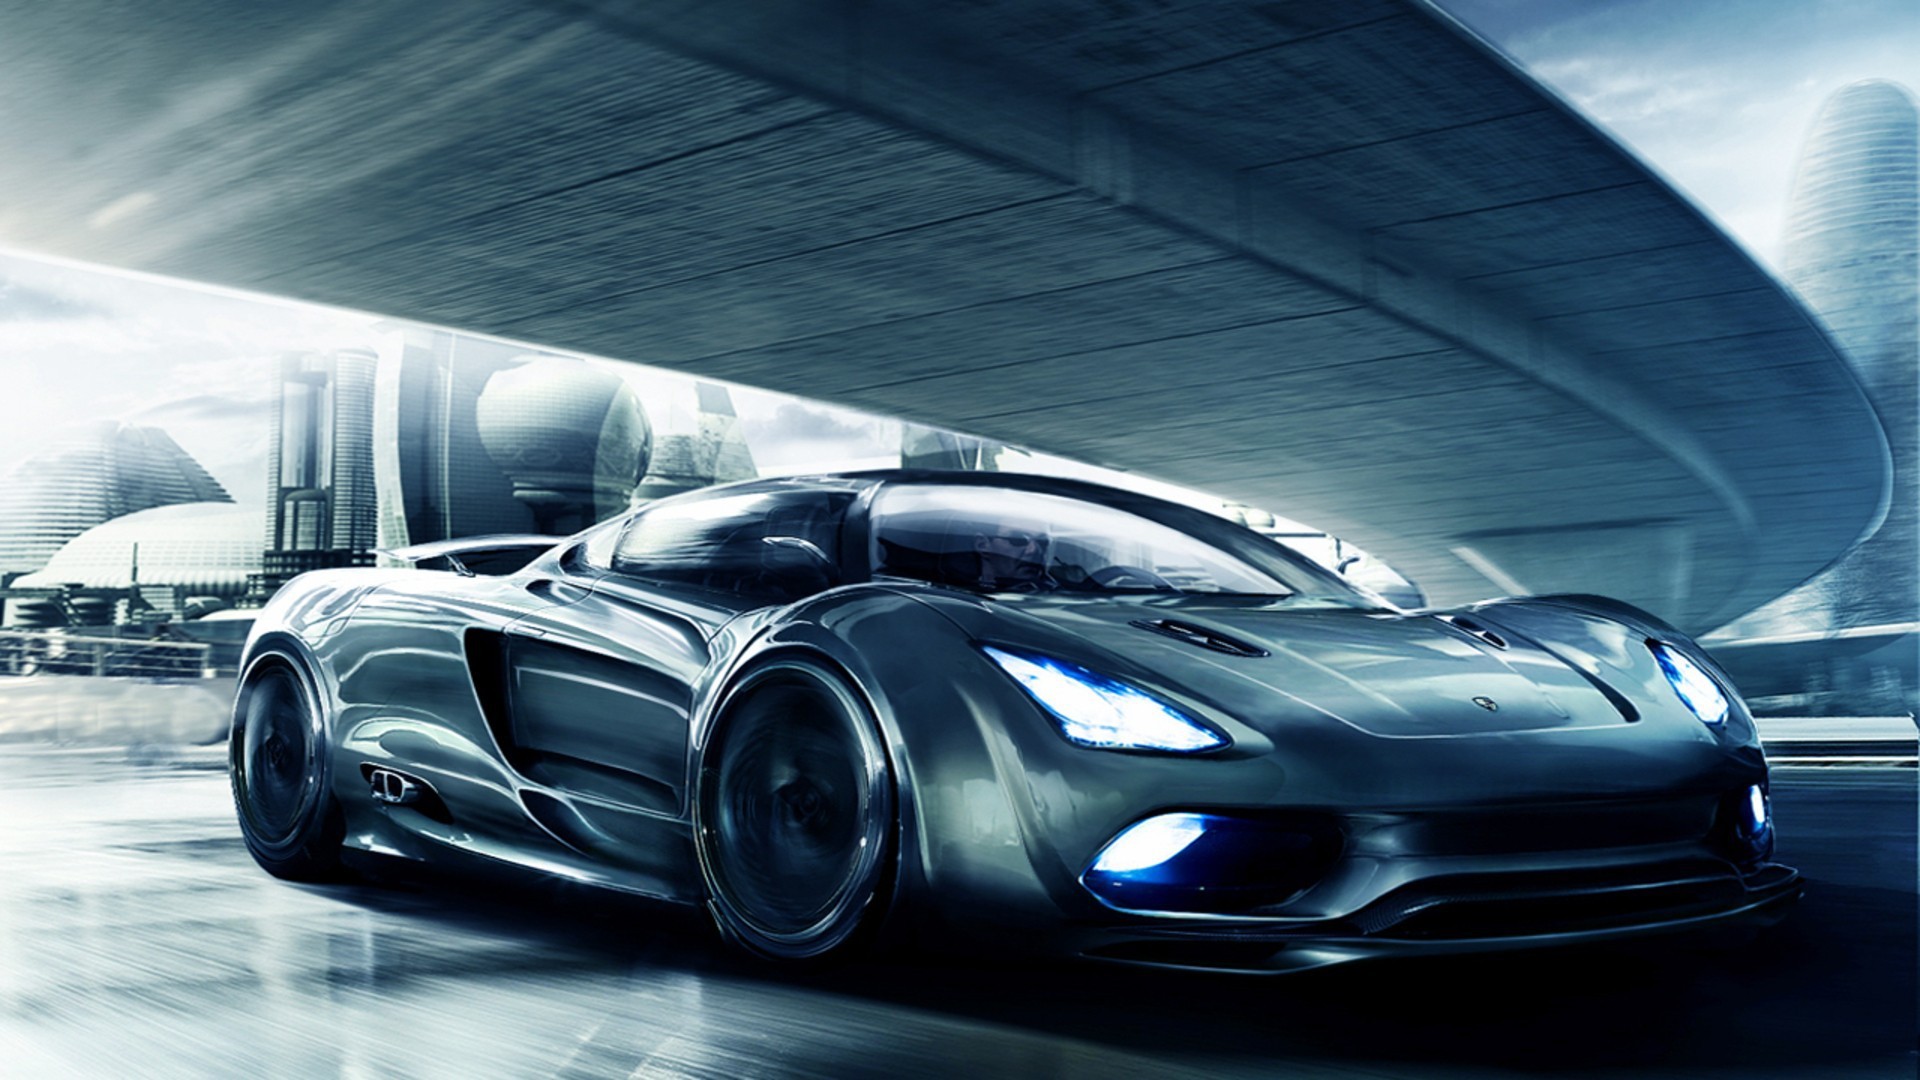 The Black Car Of The Future Koenigsegg Agera Wallpapers And Images